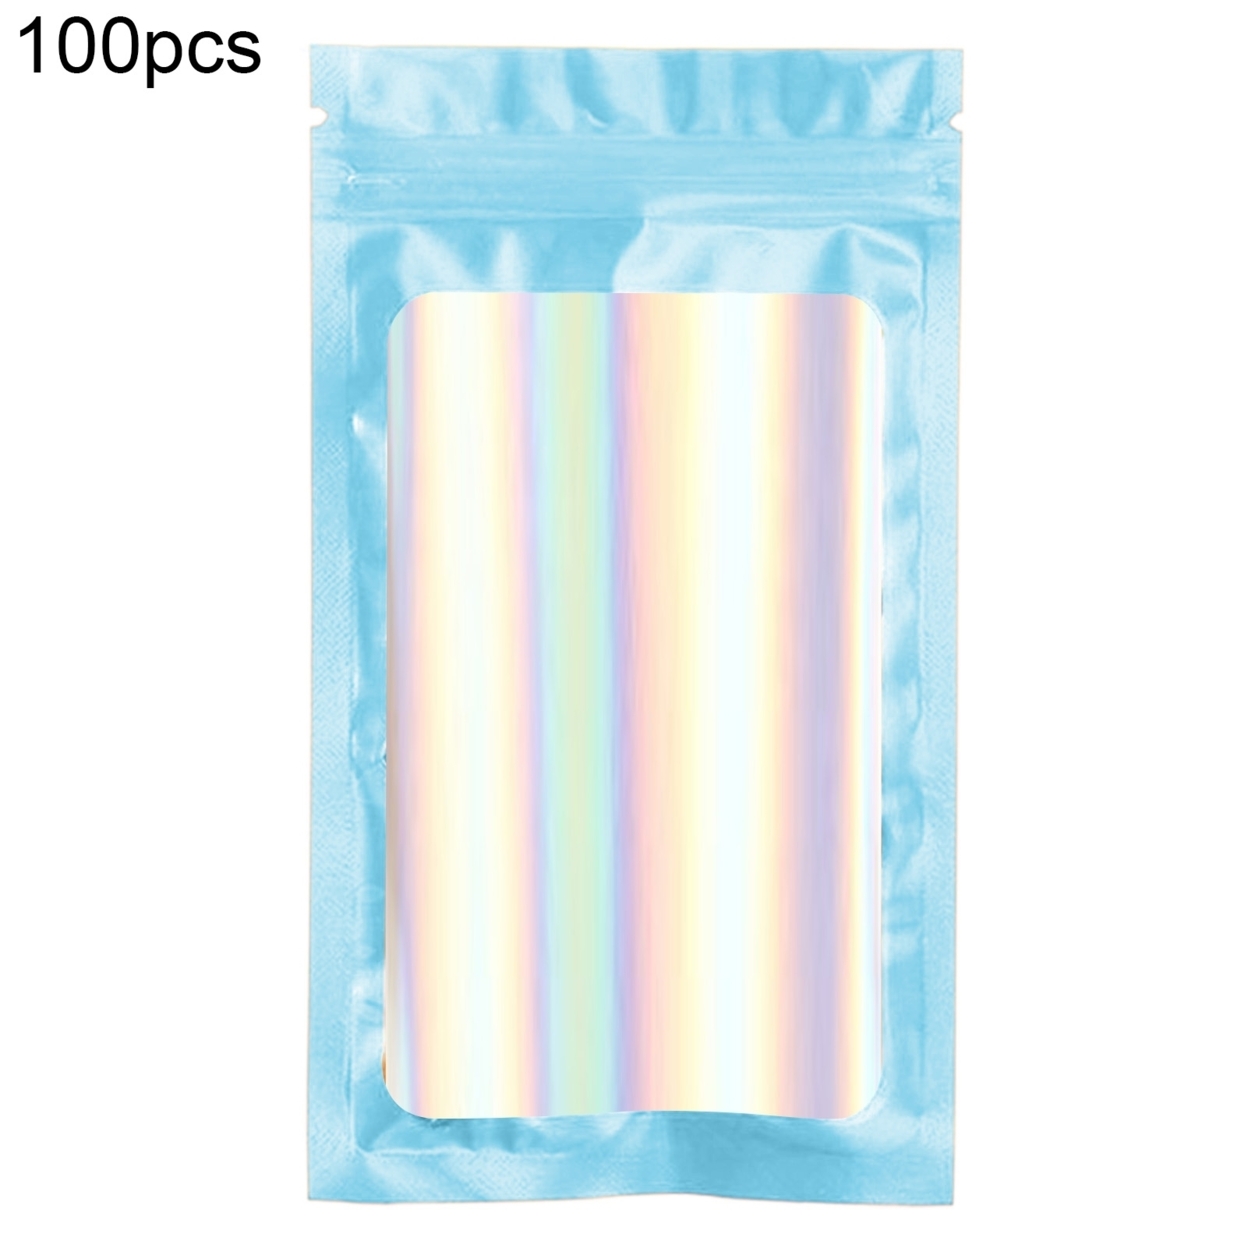 100Pcs/Set Zip-lock Bags Eye-catching Odor Proof Holographic Color Cosmetic Laser Packaging Bags for Kitchen - blue, 10*18cm